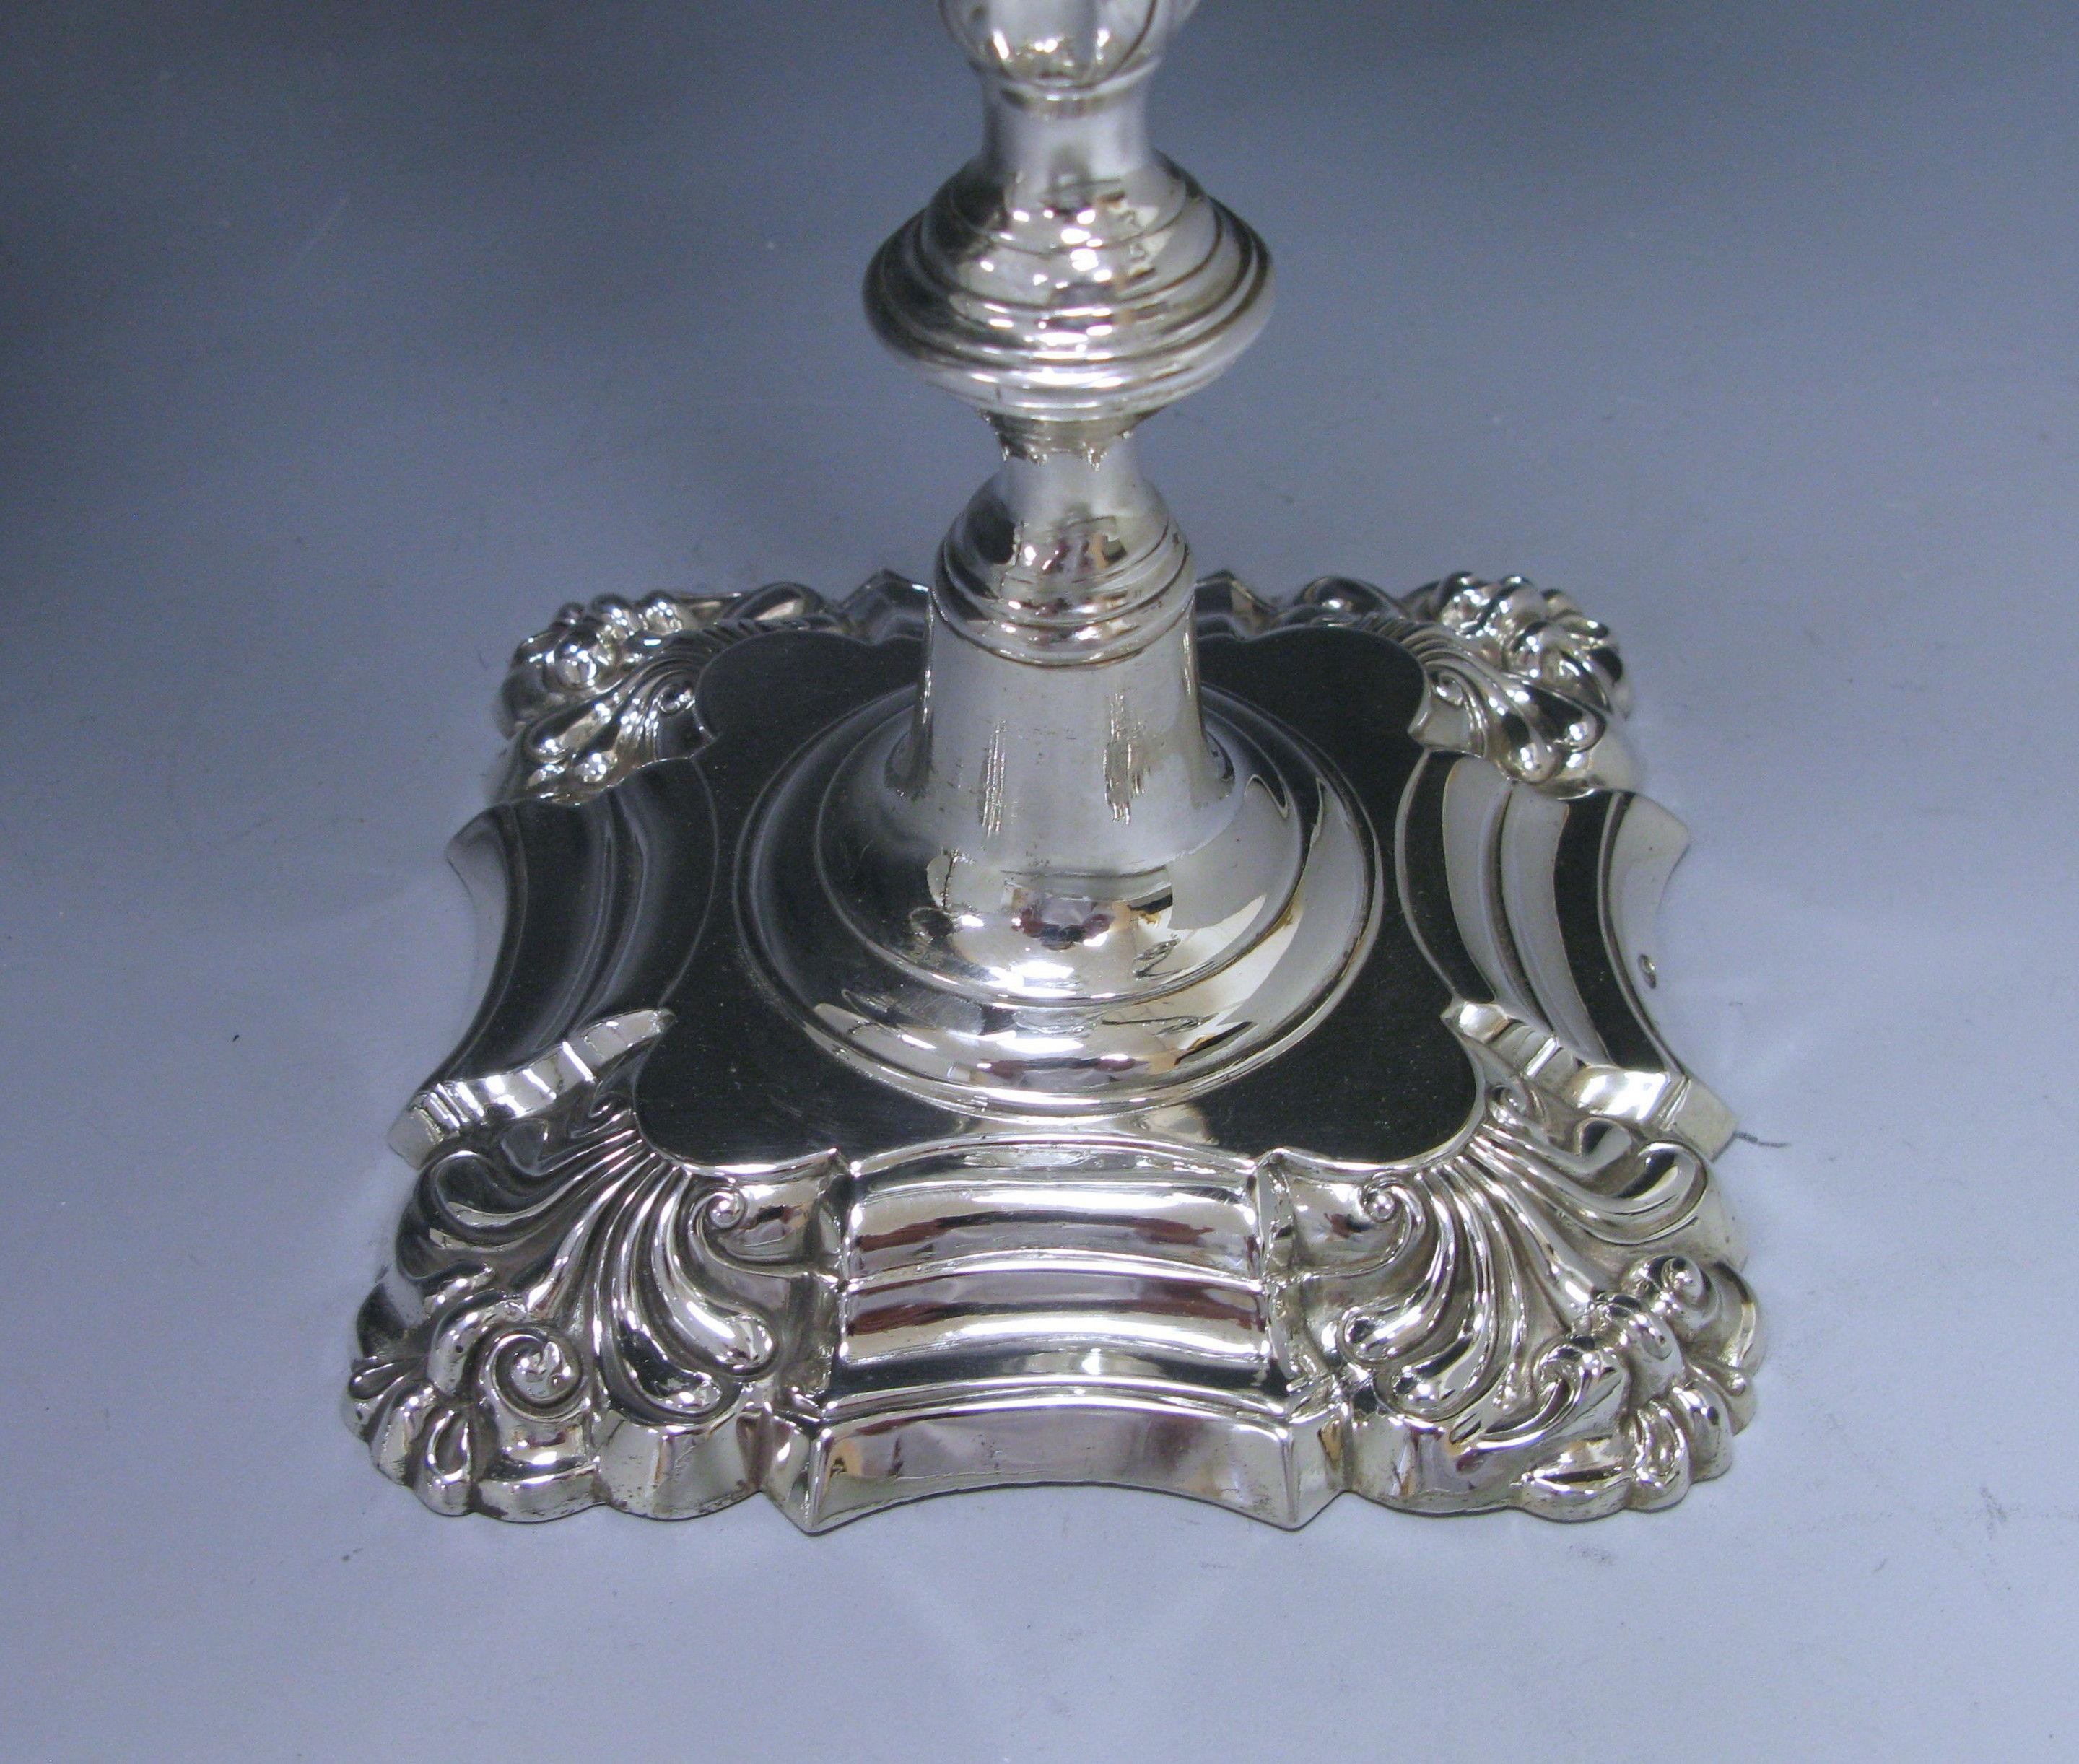 An outstanding pair cast antique silver three-light candelabra with knopped faceted columns to a four shell shaped base. The hallmarked push fit decorated arms are embellished with scrolling leaf decoration and each capital is surmounted with an